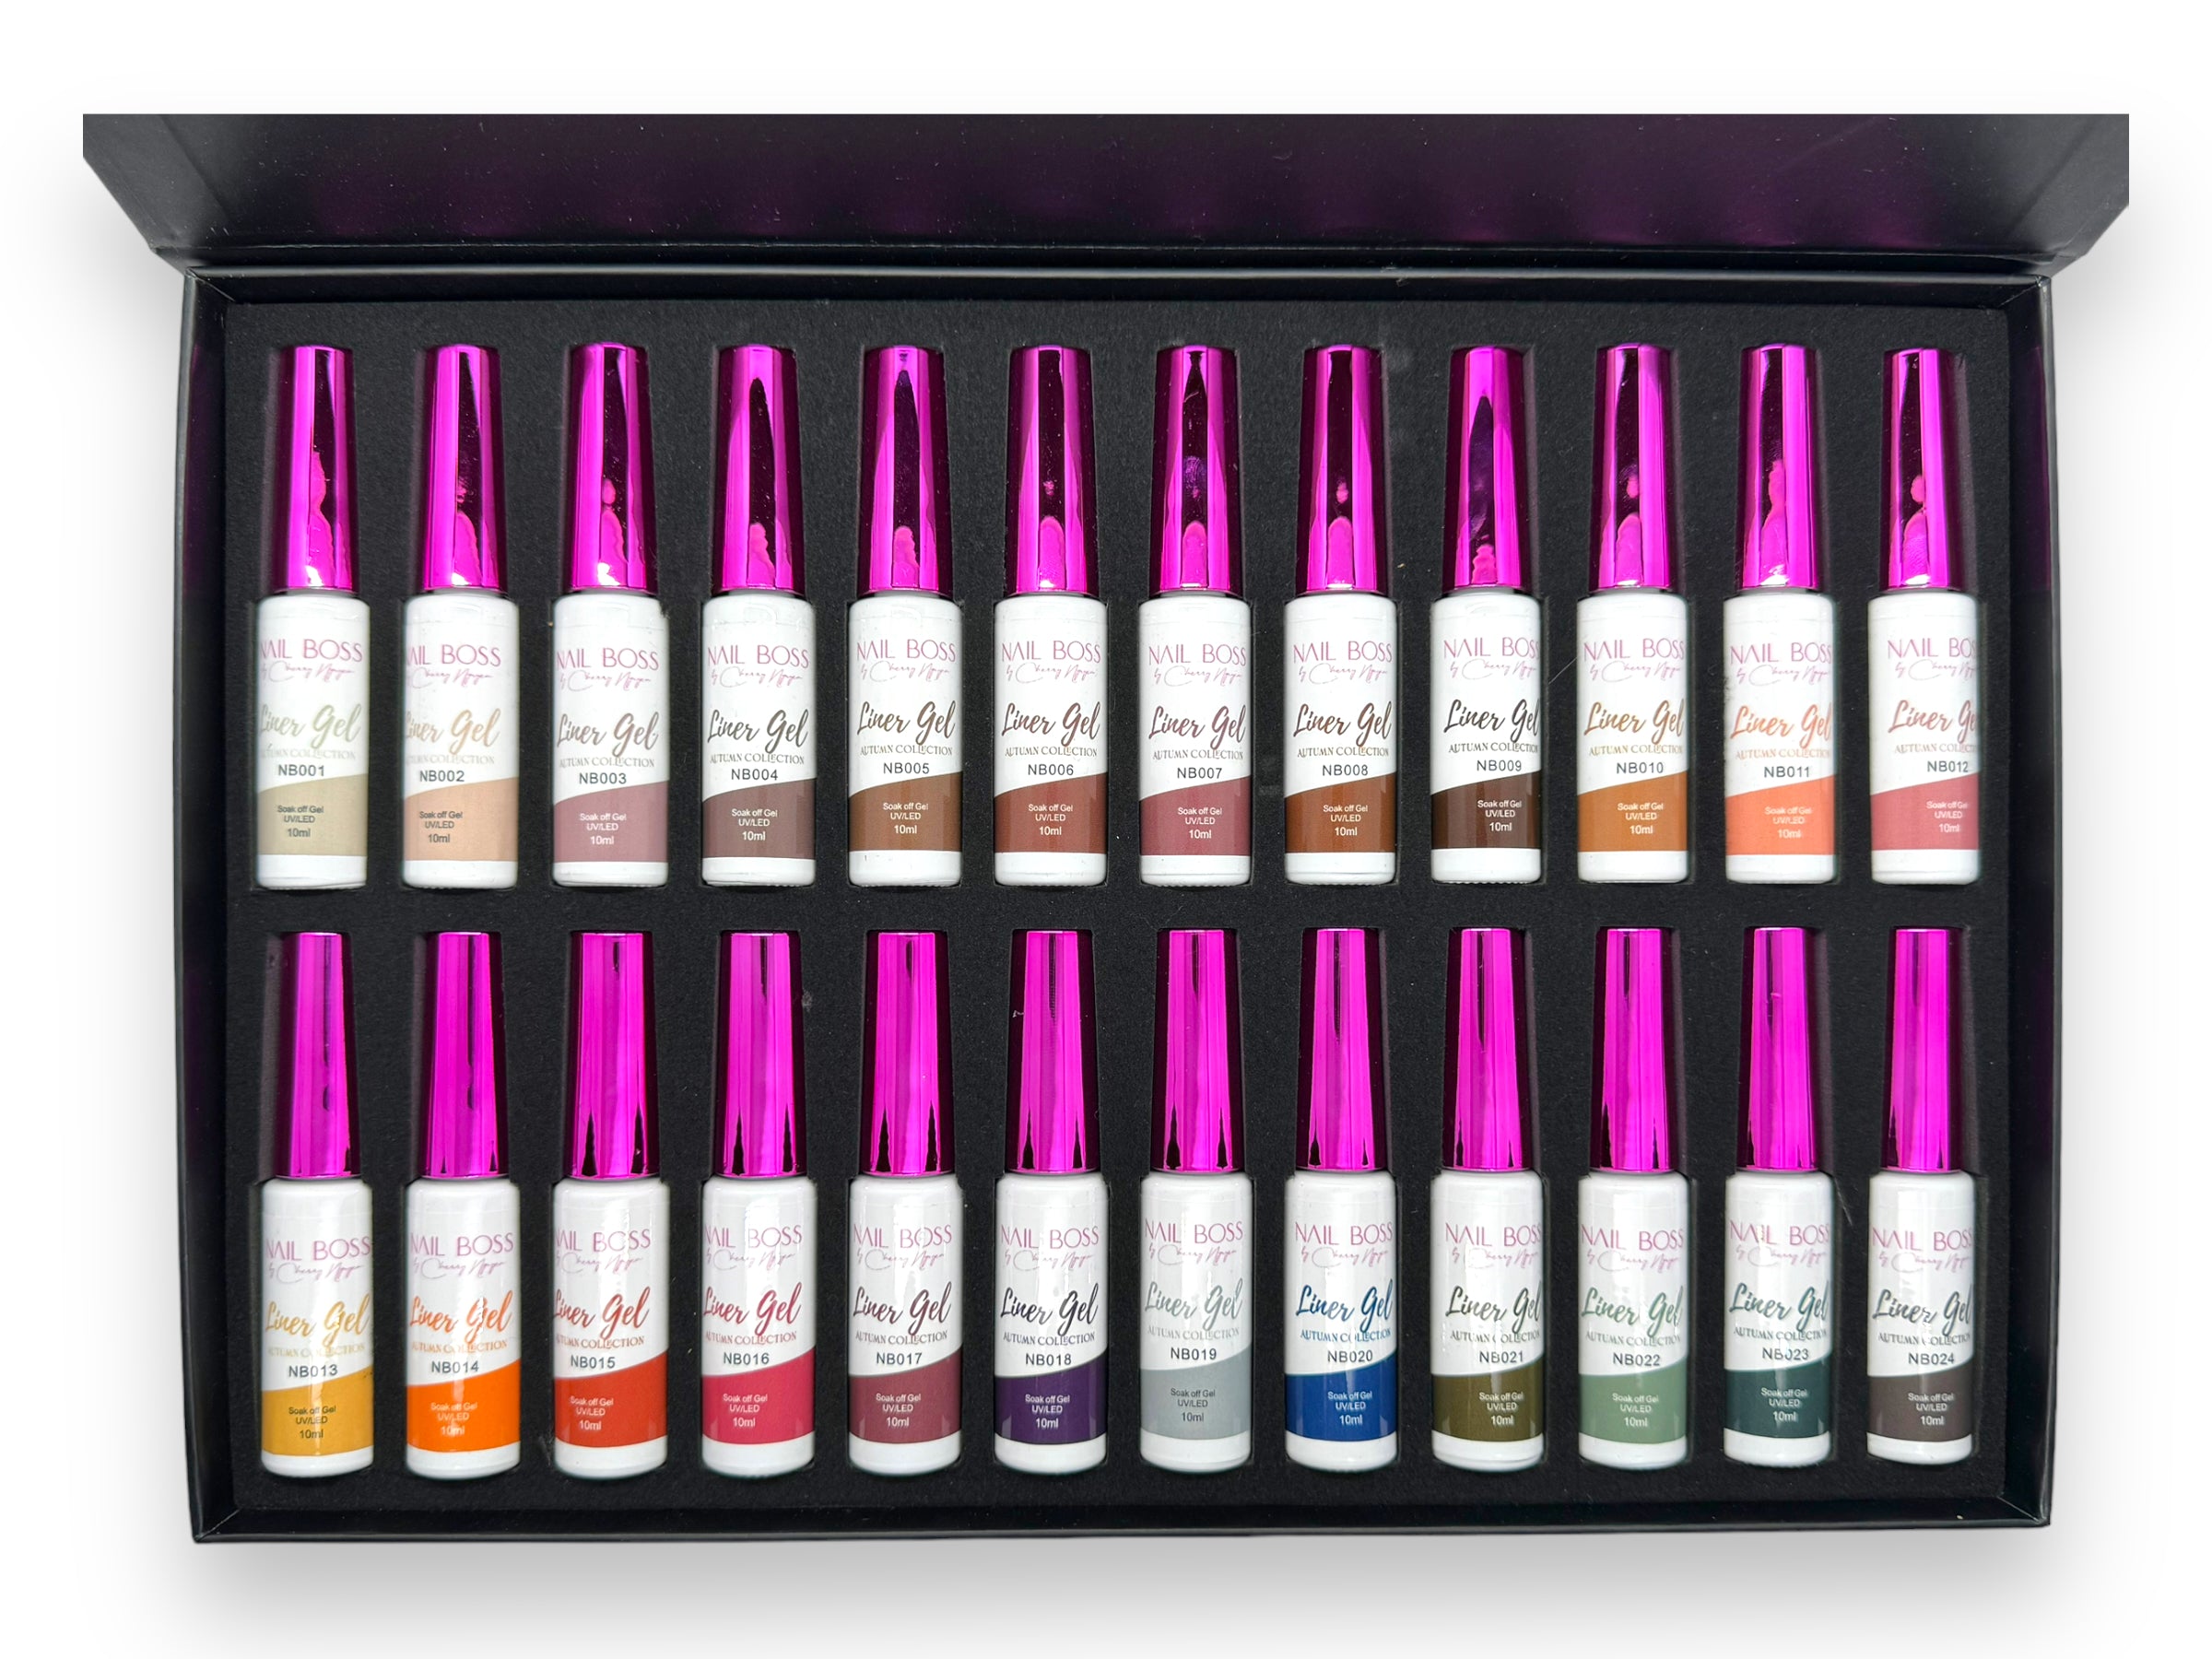 Nail Boss Liner Gel - Autumn Collection with 24 Colors